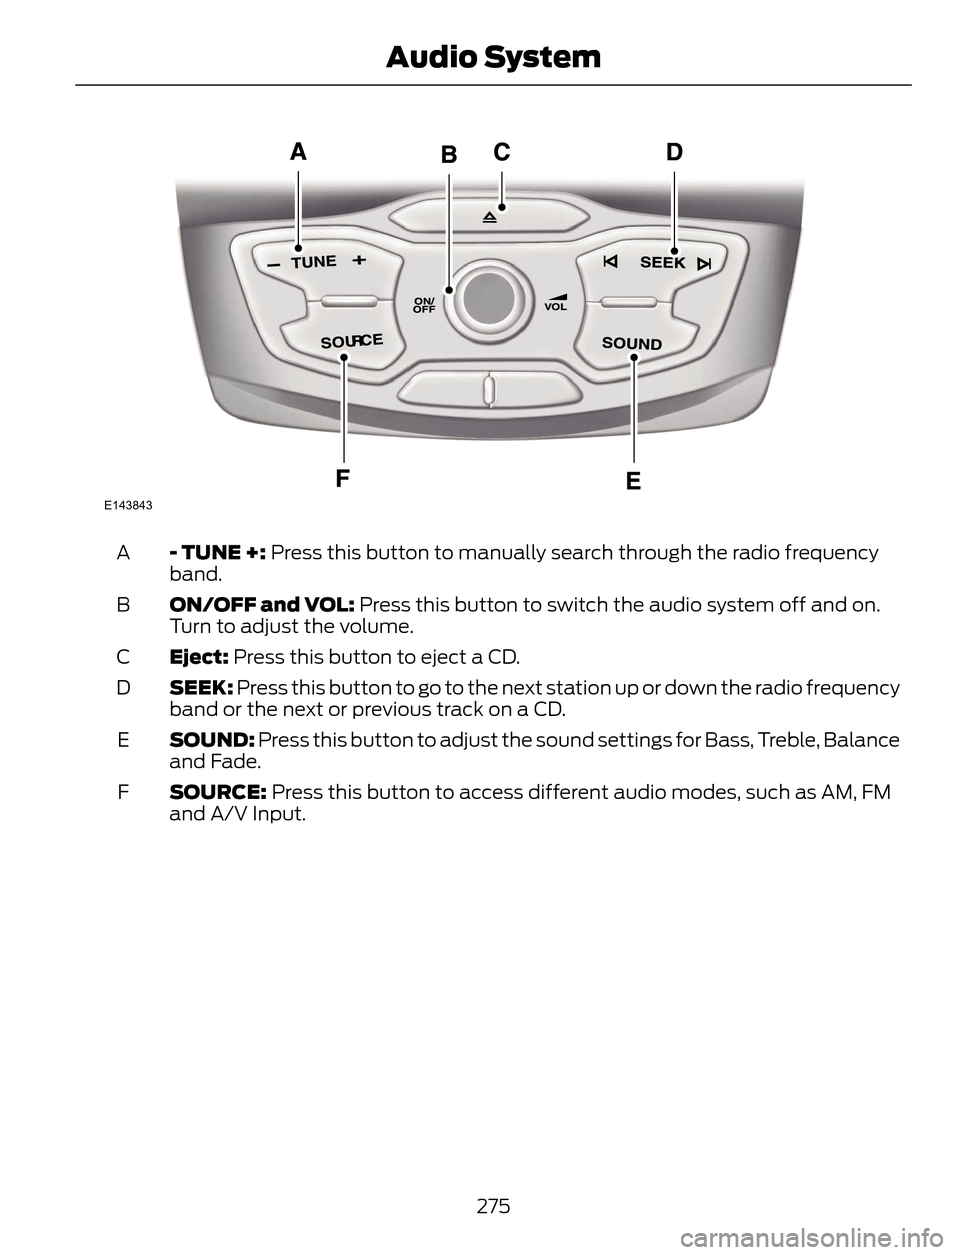 FORD ESCAPE 2014 3.G User Guide E143843
- TUNE +: Press this button to manually search through the radio frequency
band. A
ON/OFF and VOL: Press this button to switch the audio system off and on.
Turn to adjust the volume. B
Eject: 